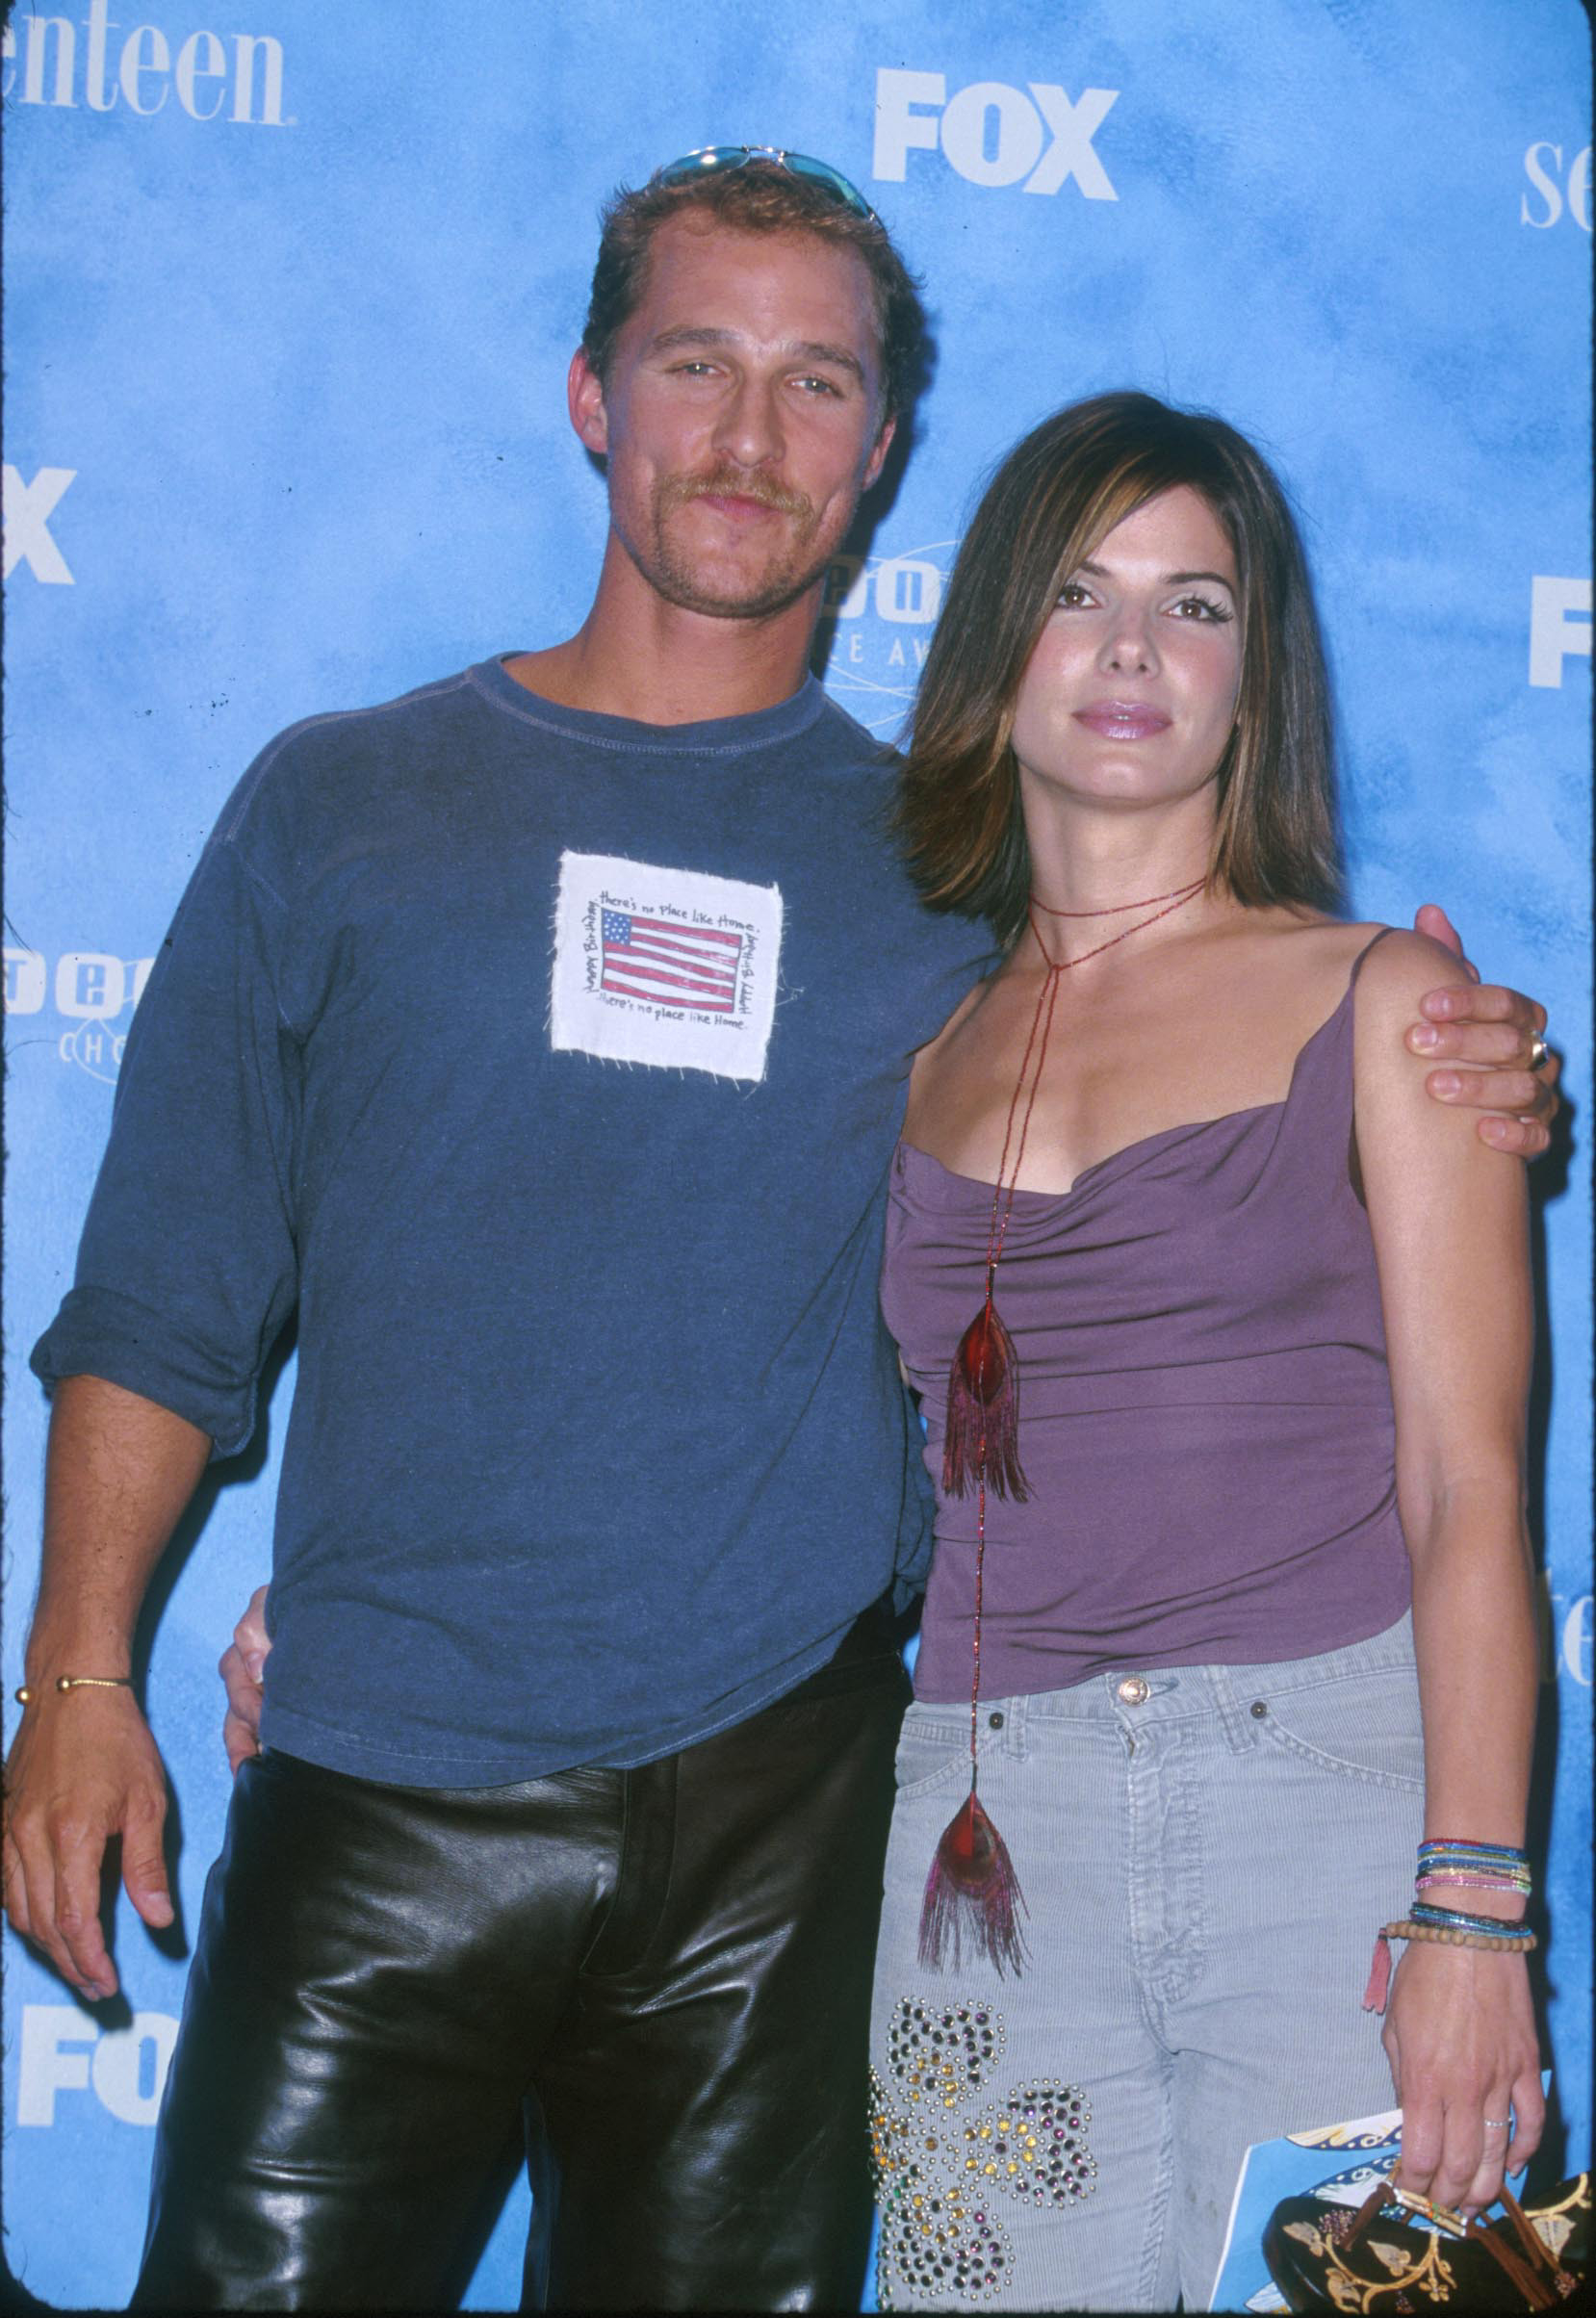 Two celebrities pose together; the man wears a casual shirt and leather pants, while the woman has on a tank top with a fringed detail